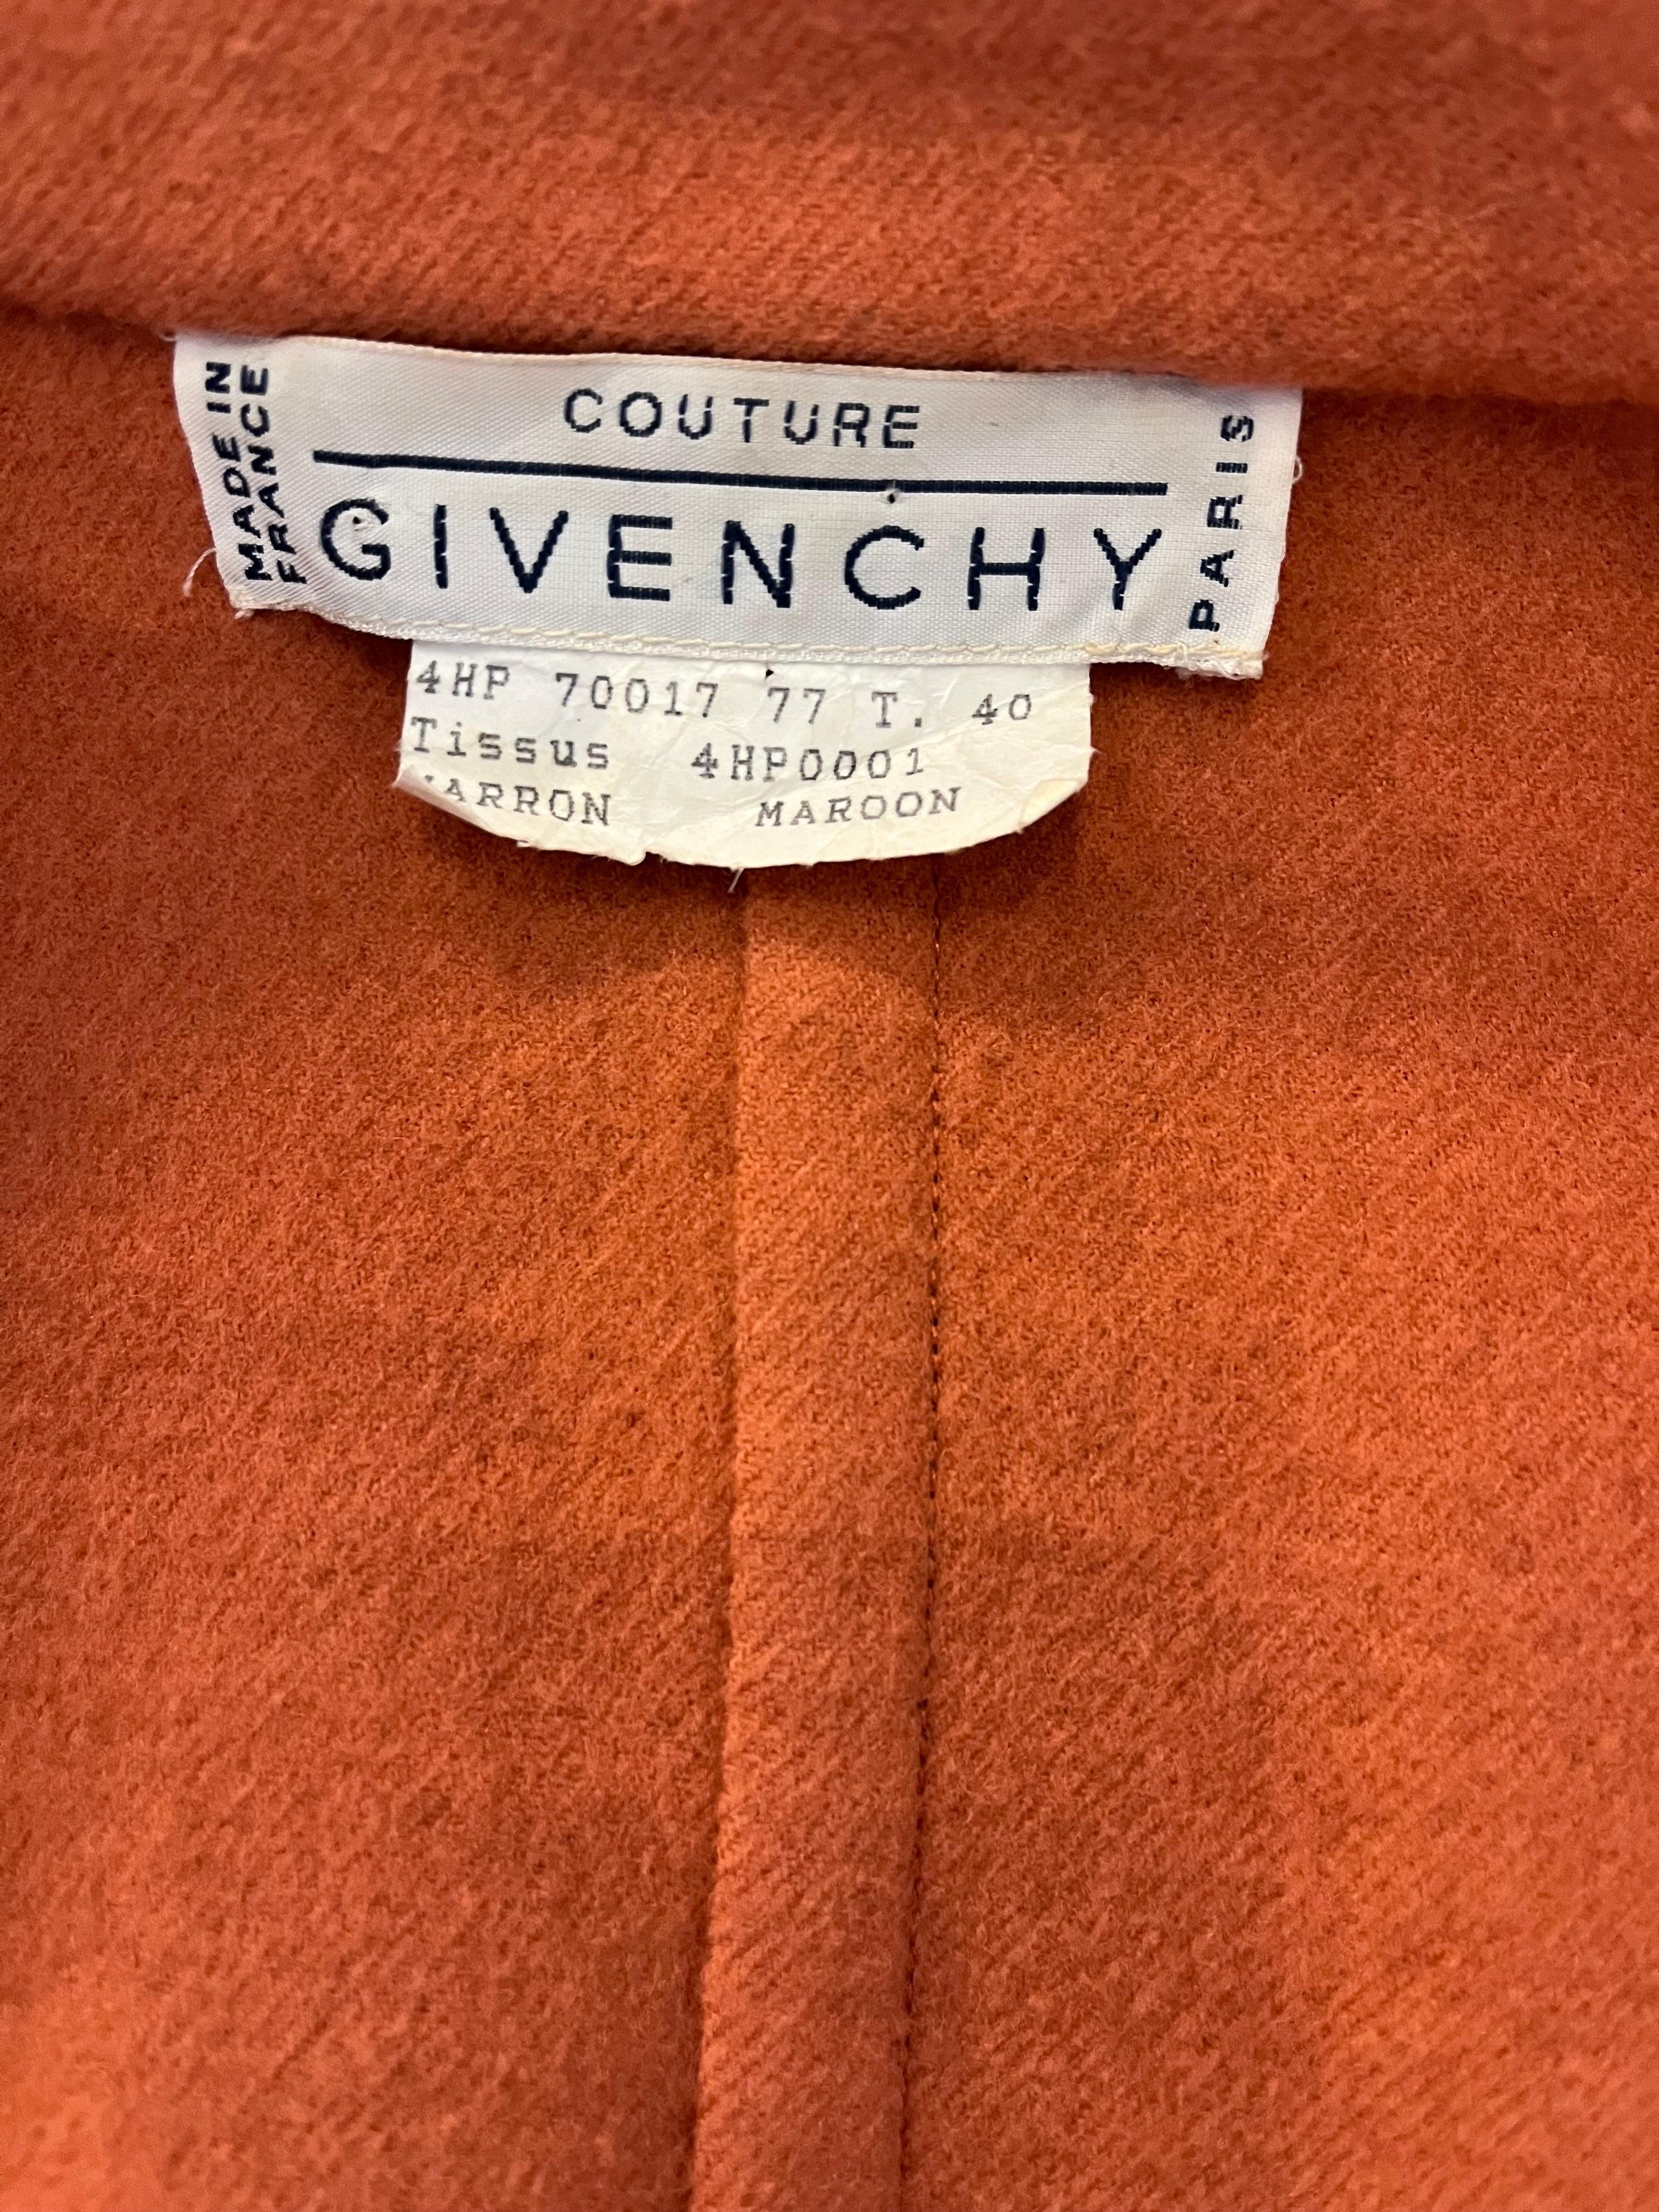 1980s Givenchy Couture Wool Overcoat For Sale 6